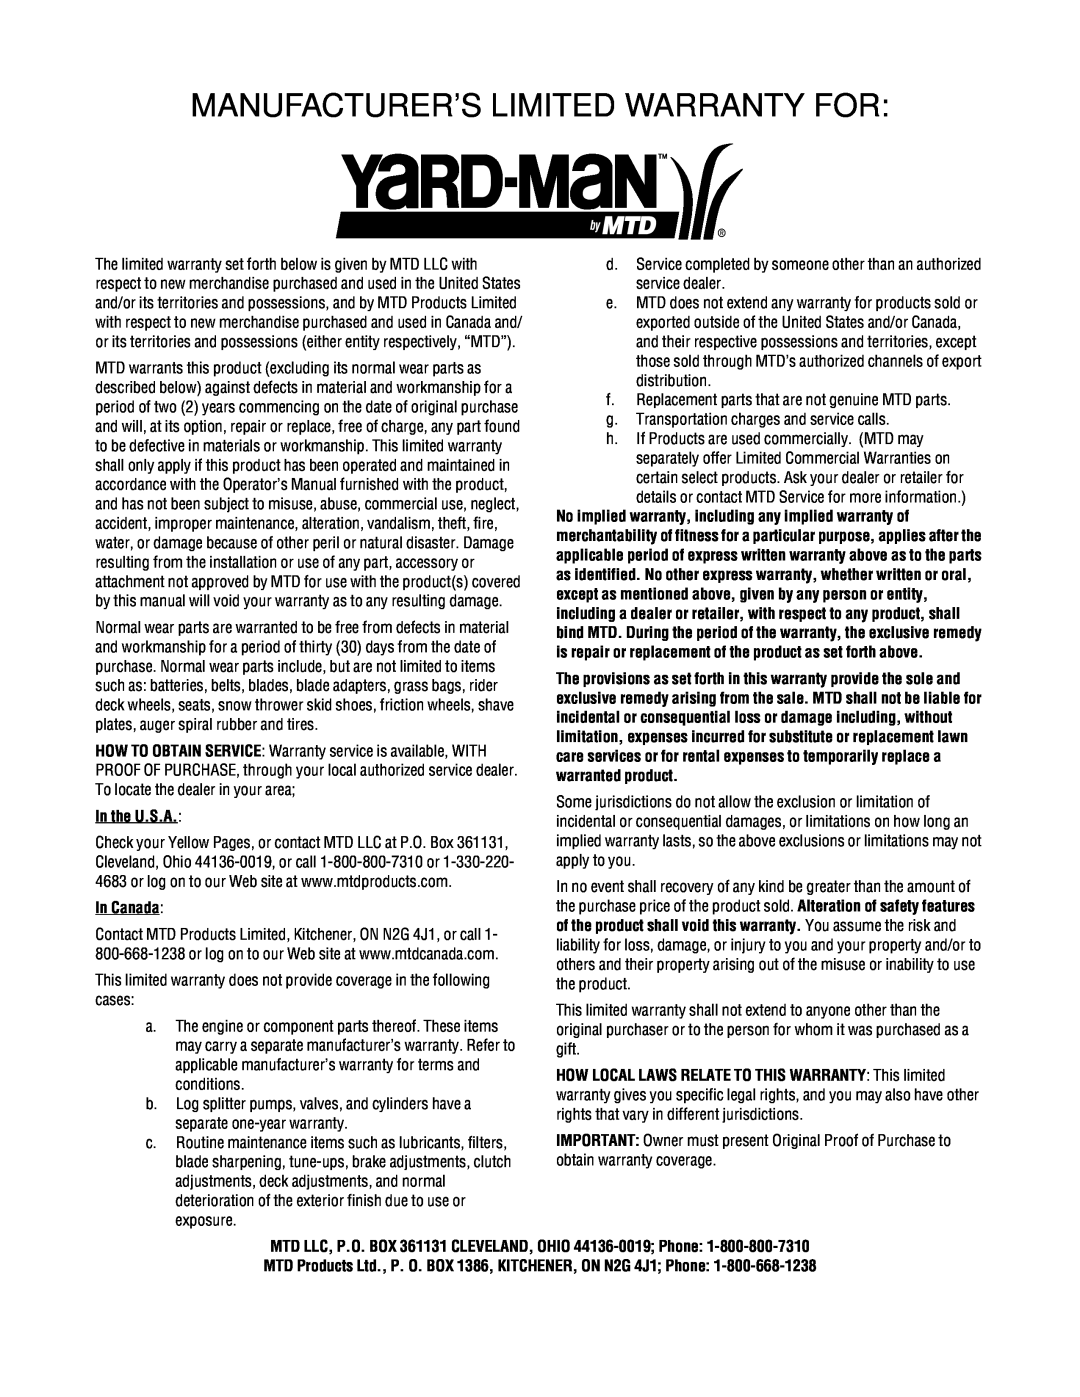 Yard-Man 2B5 & 295 manual Manufacturer’S Limited Warranty For, In the U.S.A, In Canada 